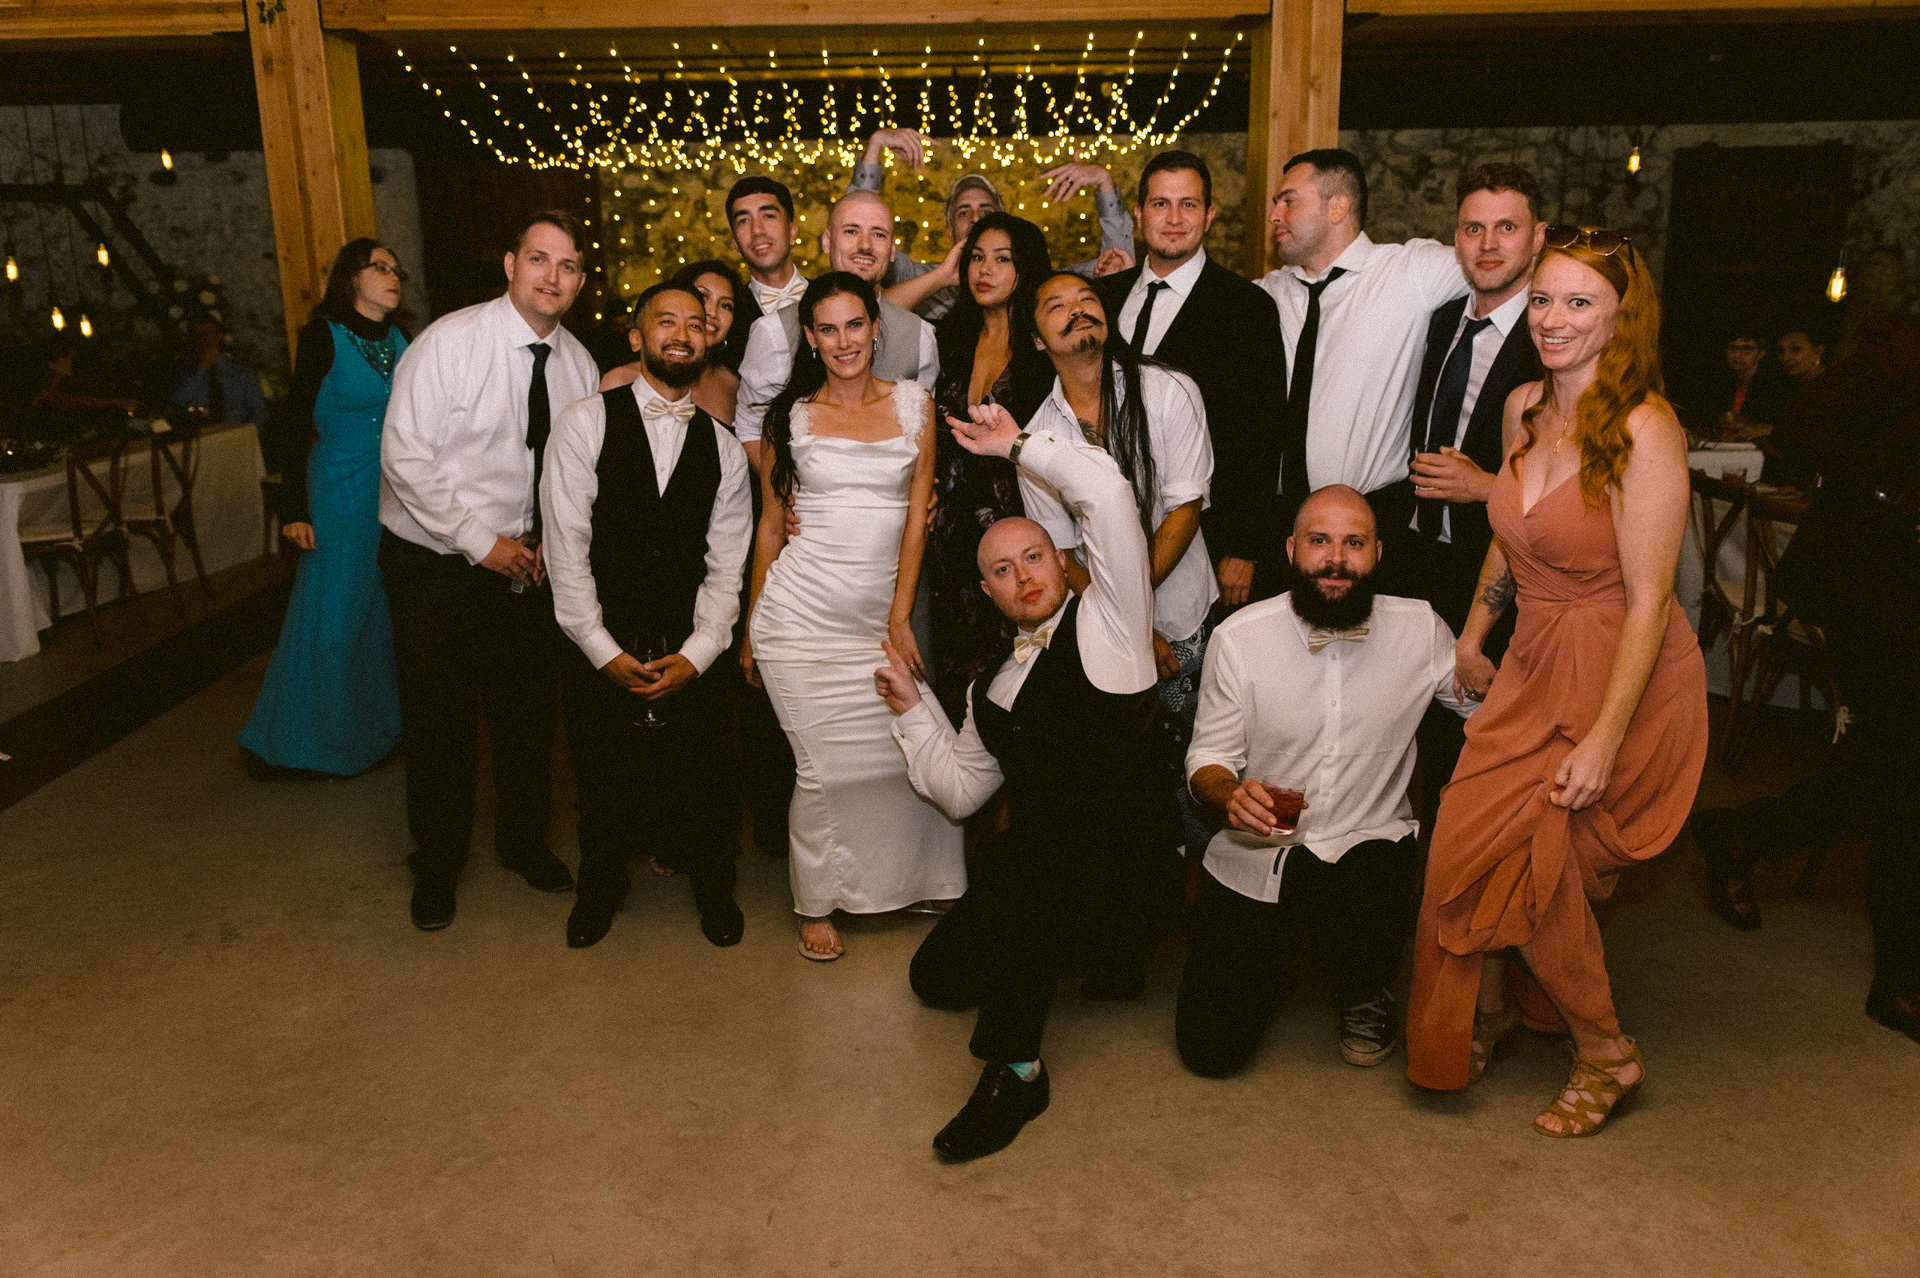 A group of people at a wedding posing for a photo, with some making playful gestures.